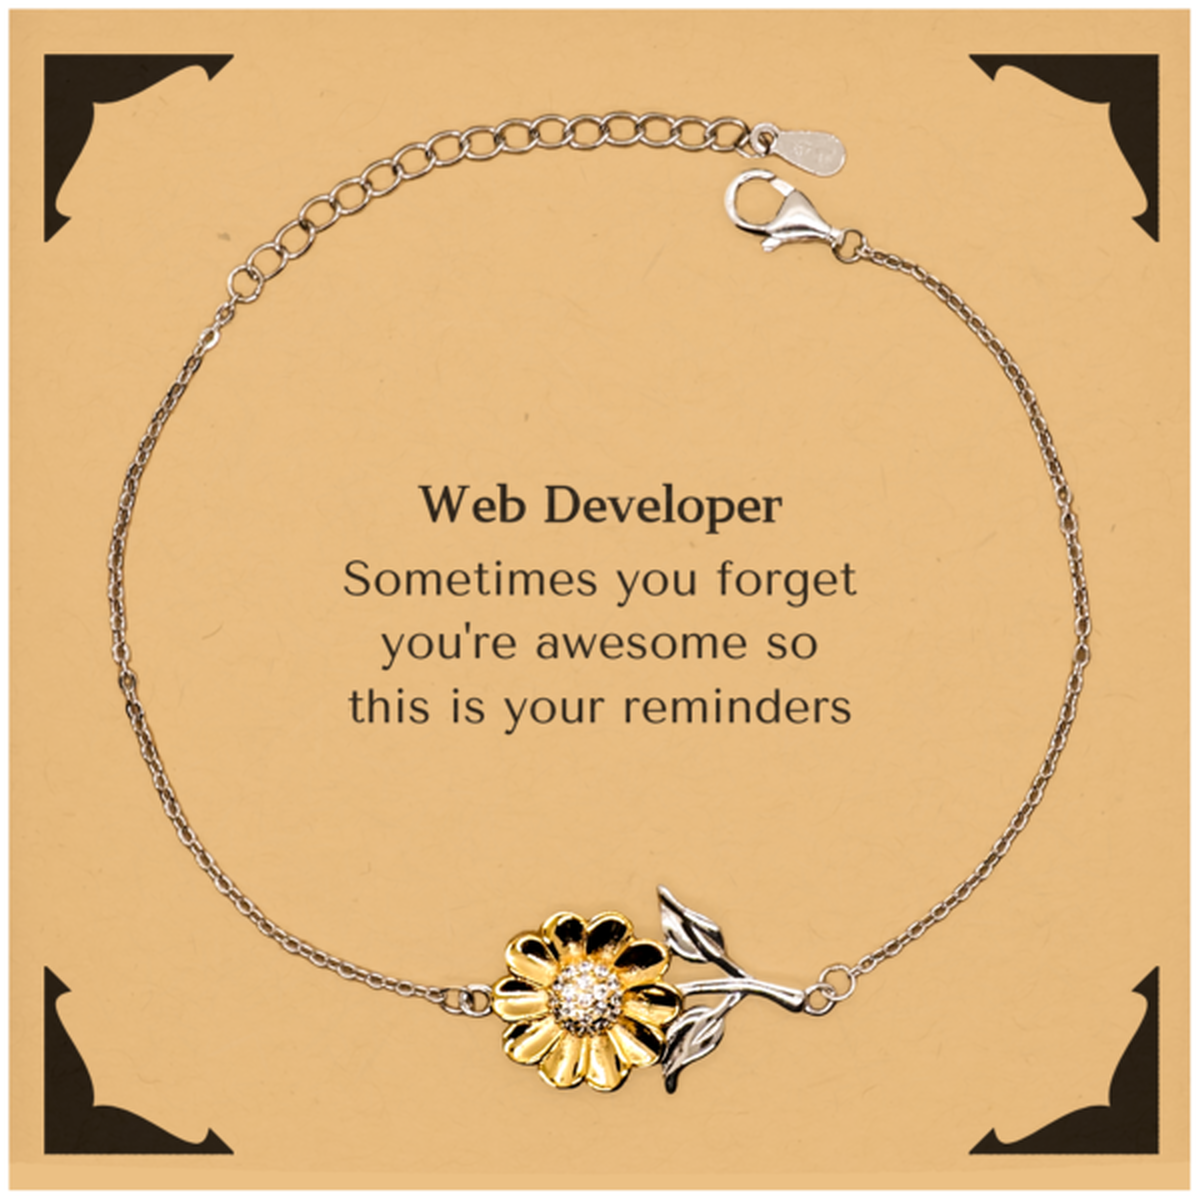 Sentimental Web Developer Sunflower Bracelet, Web Developer Sometimes you forget you're awesome so this is your reminders, Graduation Christmas Birthday Gifts for Web Developer, Men, Women, Coworkers